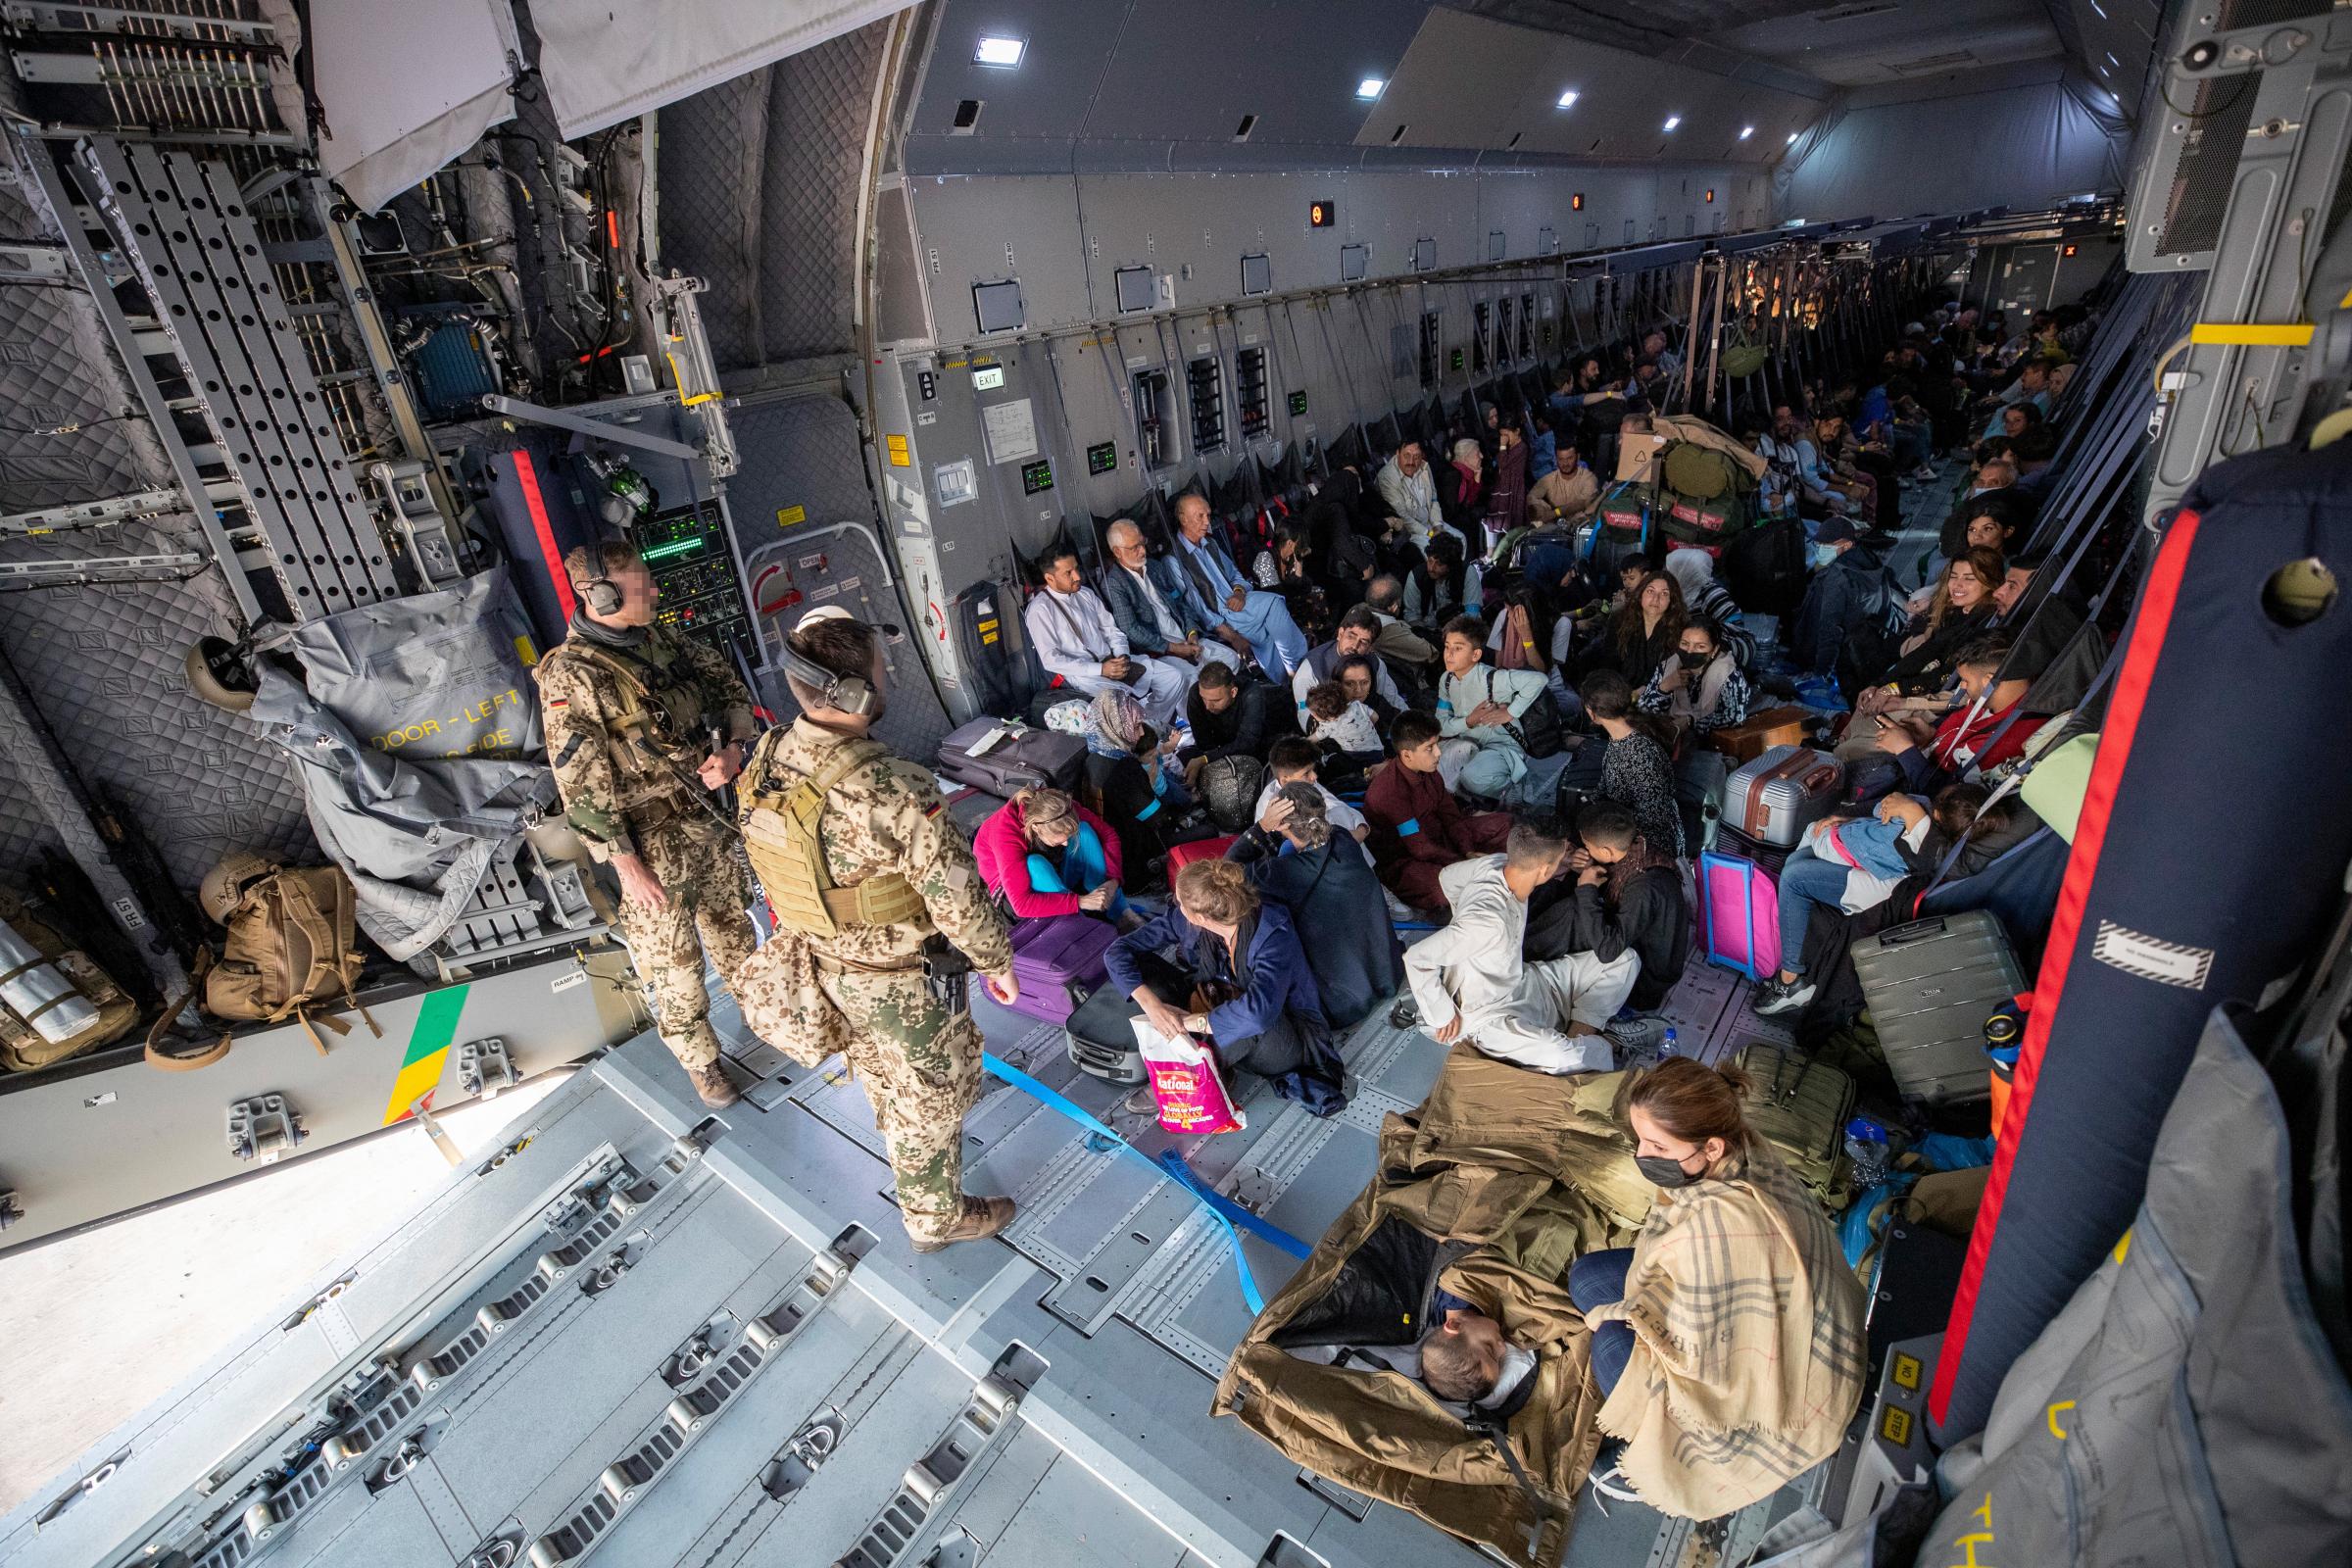 EVACUATED: Evacuees from Kabul sit inside a military aircraft as they arrive at Tashkent Airport in Uzbekistan. Picture: Marc Tessensohn/Bundeswehr via Getty Images